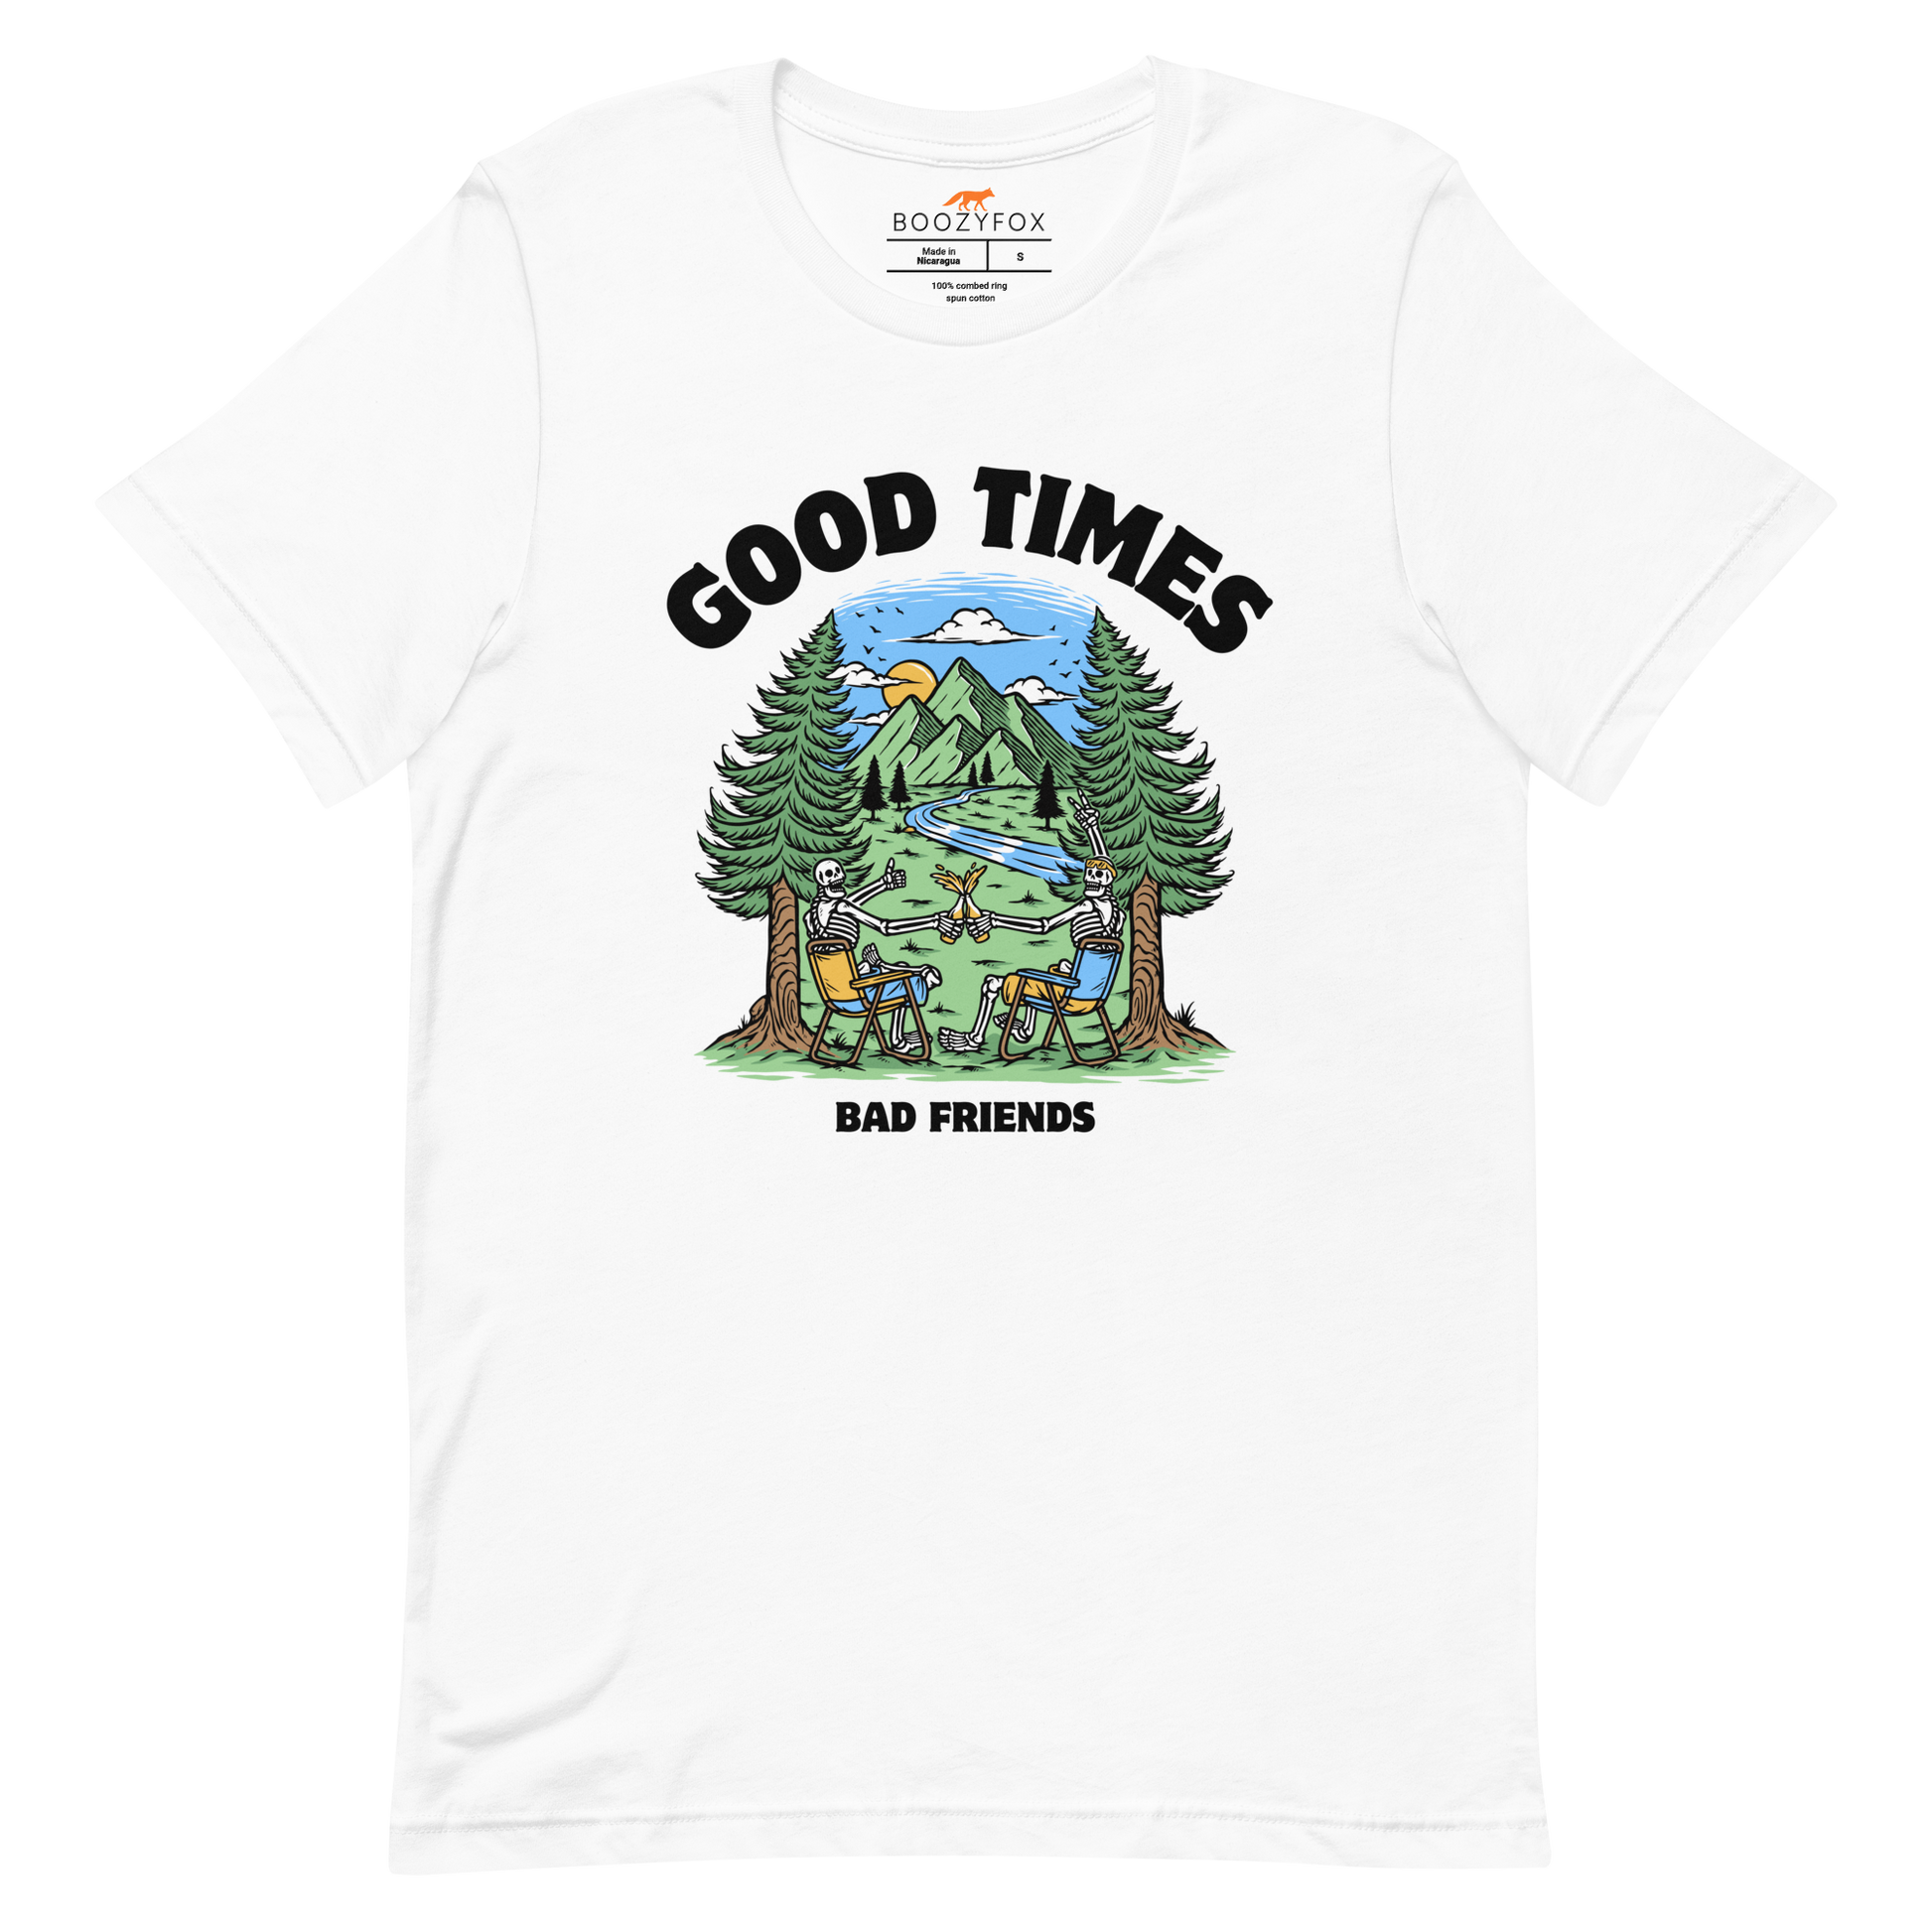 White Premium Good Times Bad Friends Tee featuring a lively graphic of friends enjoying a beer in nature - Funny Graphic Nature Tees - Boozy Fox